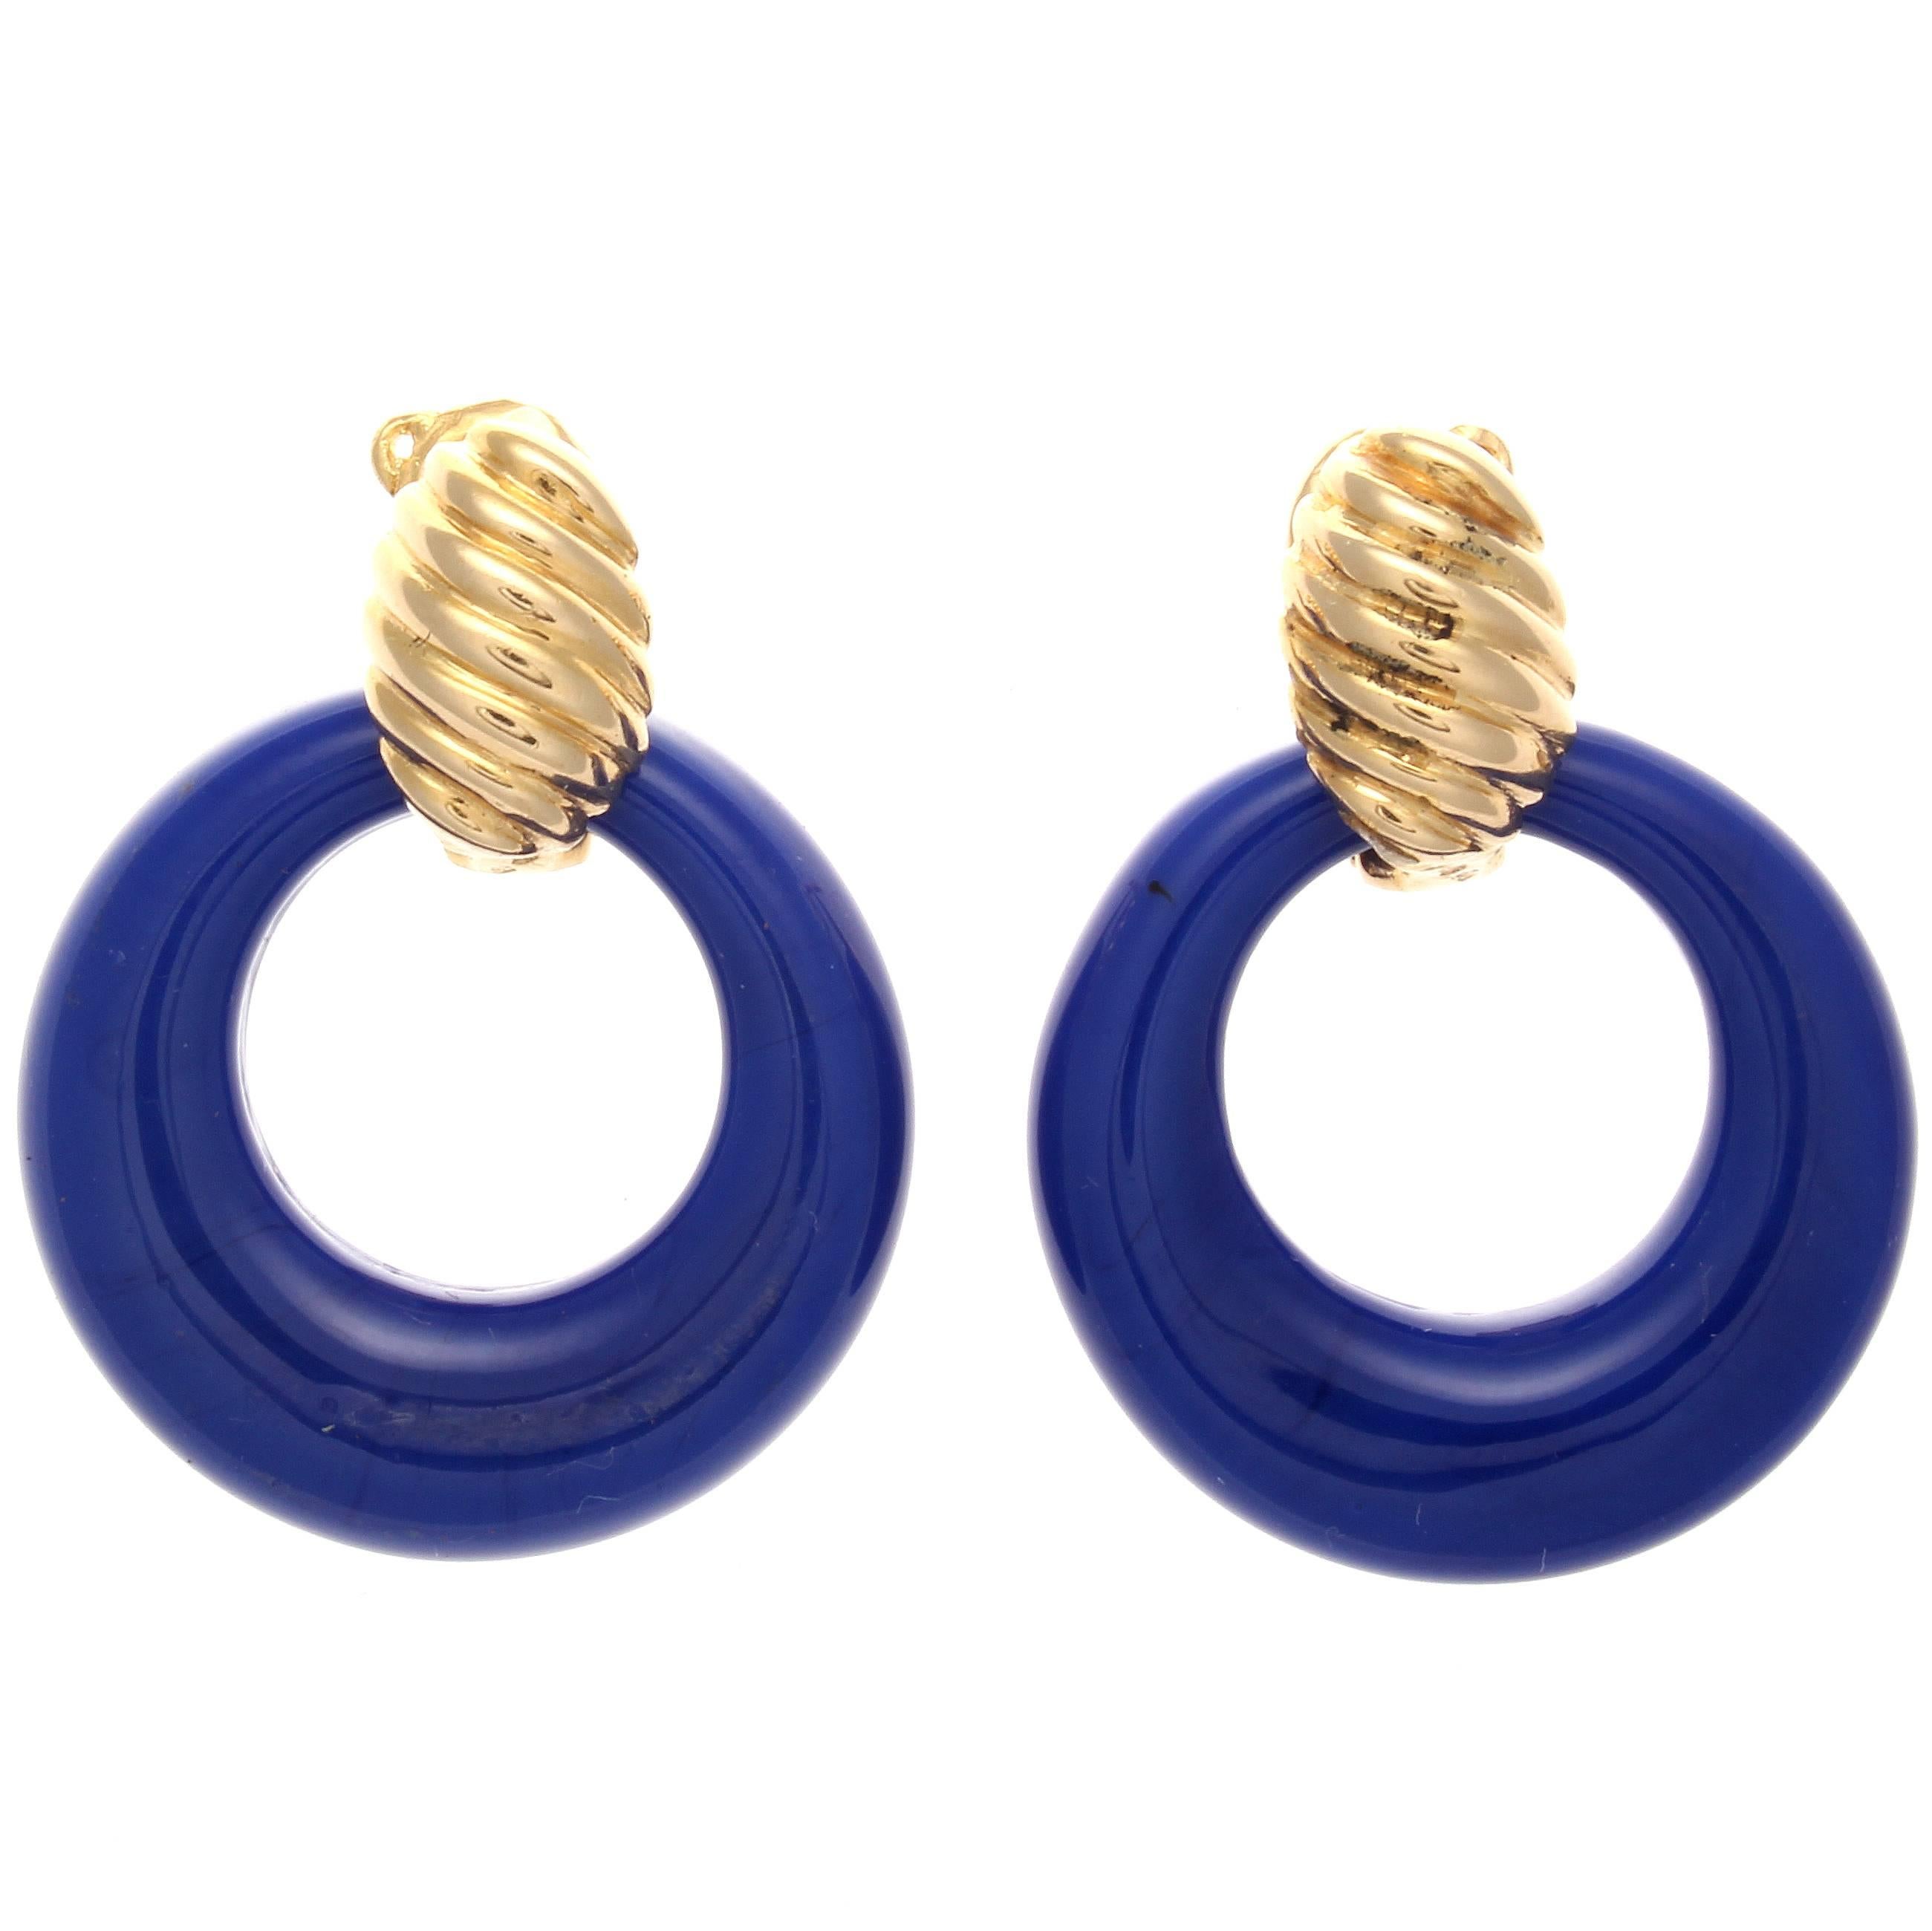 An intelligent chameleon design from Van Cleef & Arpels that features interchangeable door knocker earrings. Featuring hoops of royal blue chalcedony, jet black onyx and glistening 18k yellow gold. Signed VCA and numbered. 